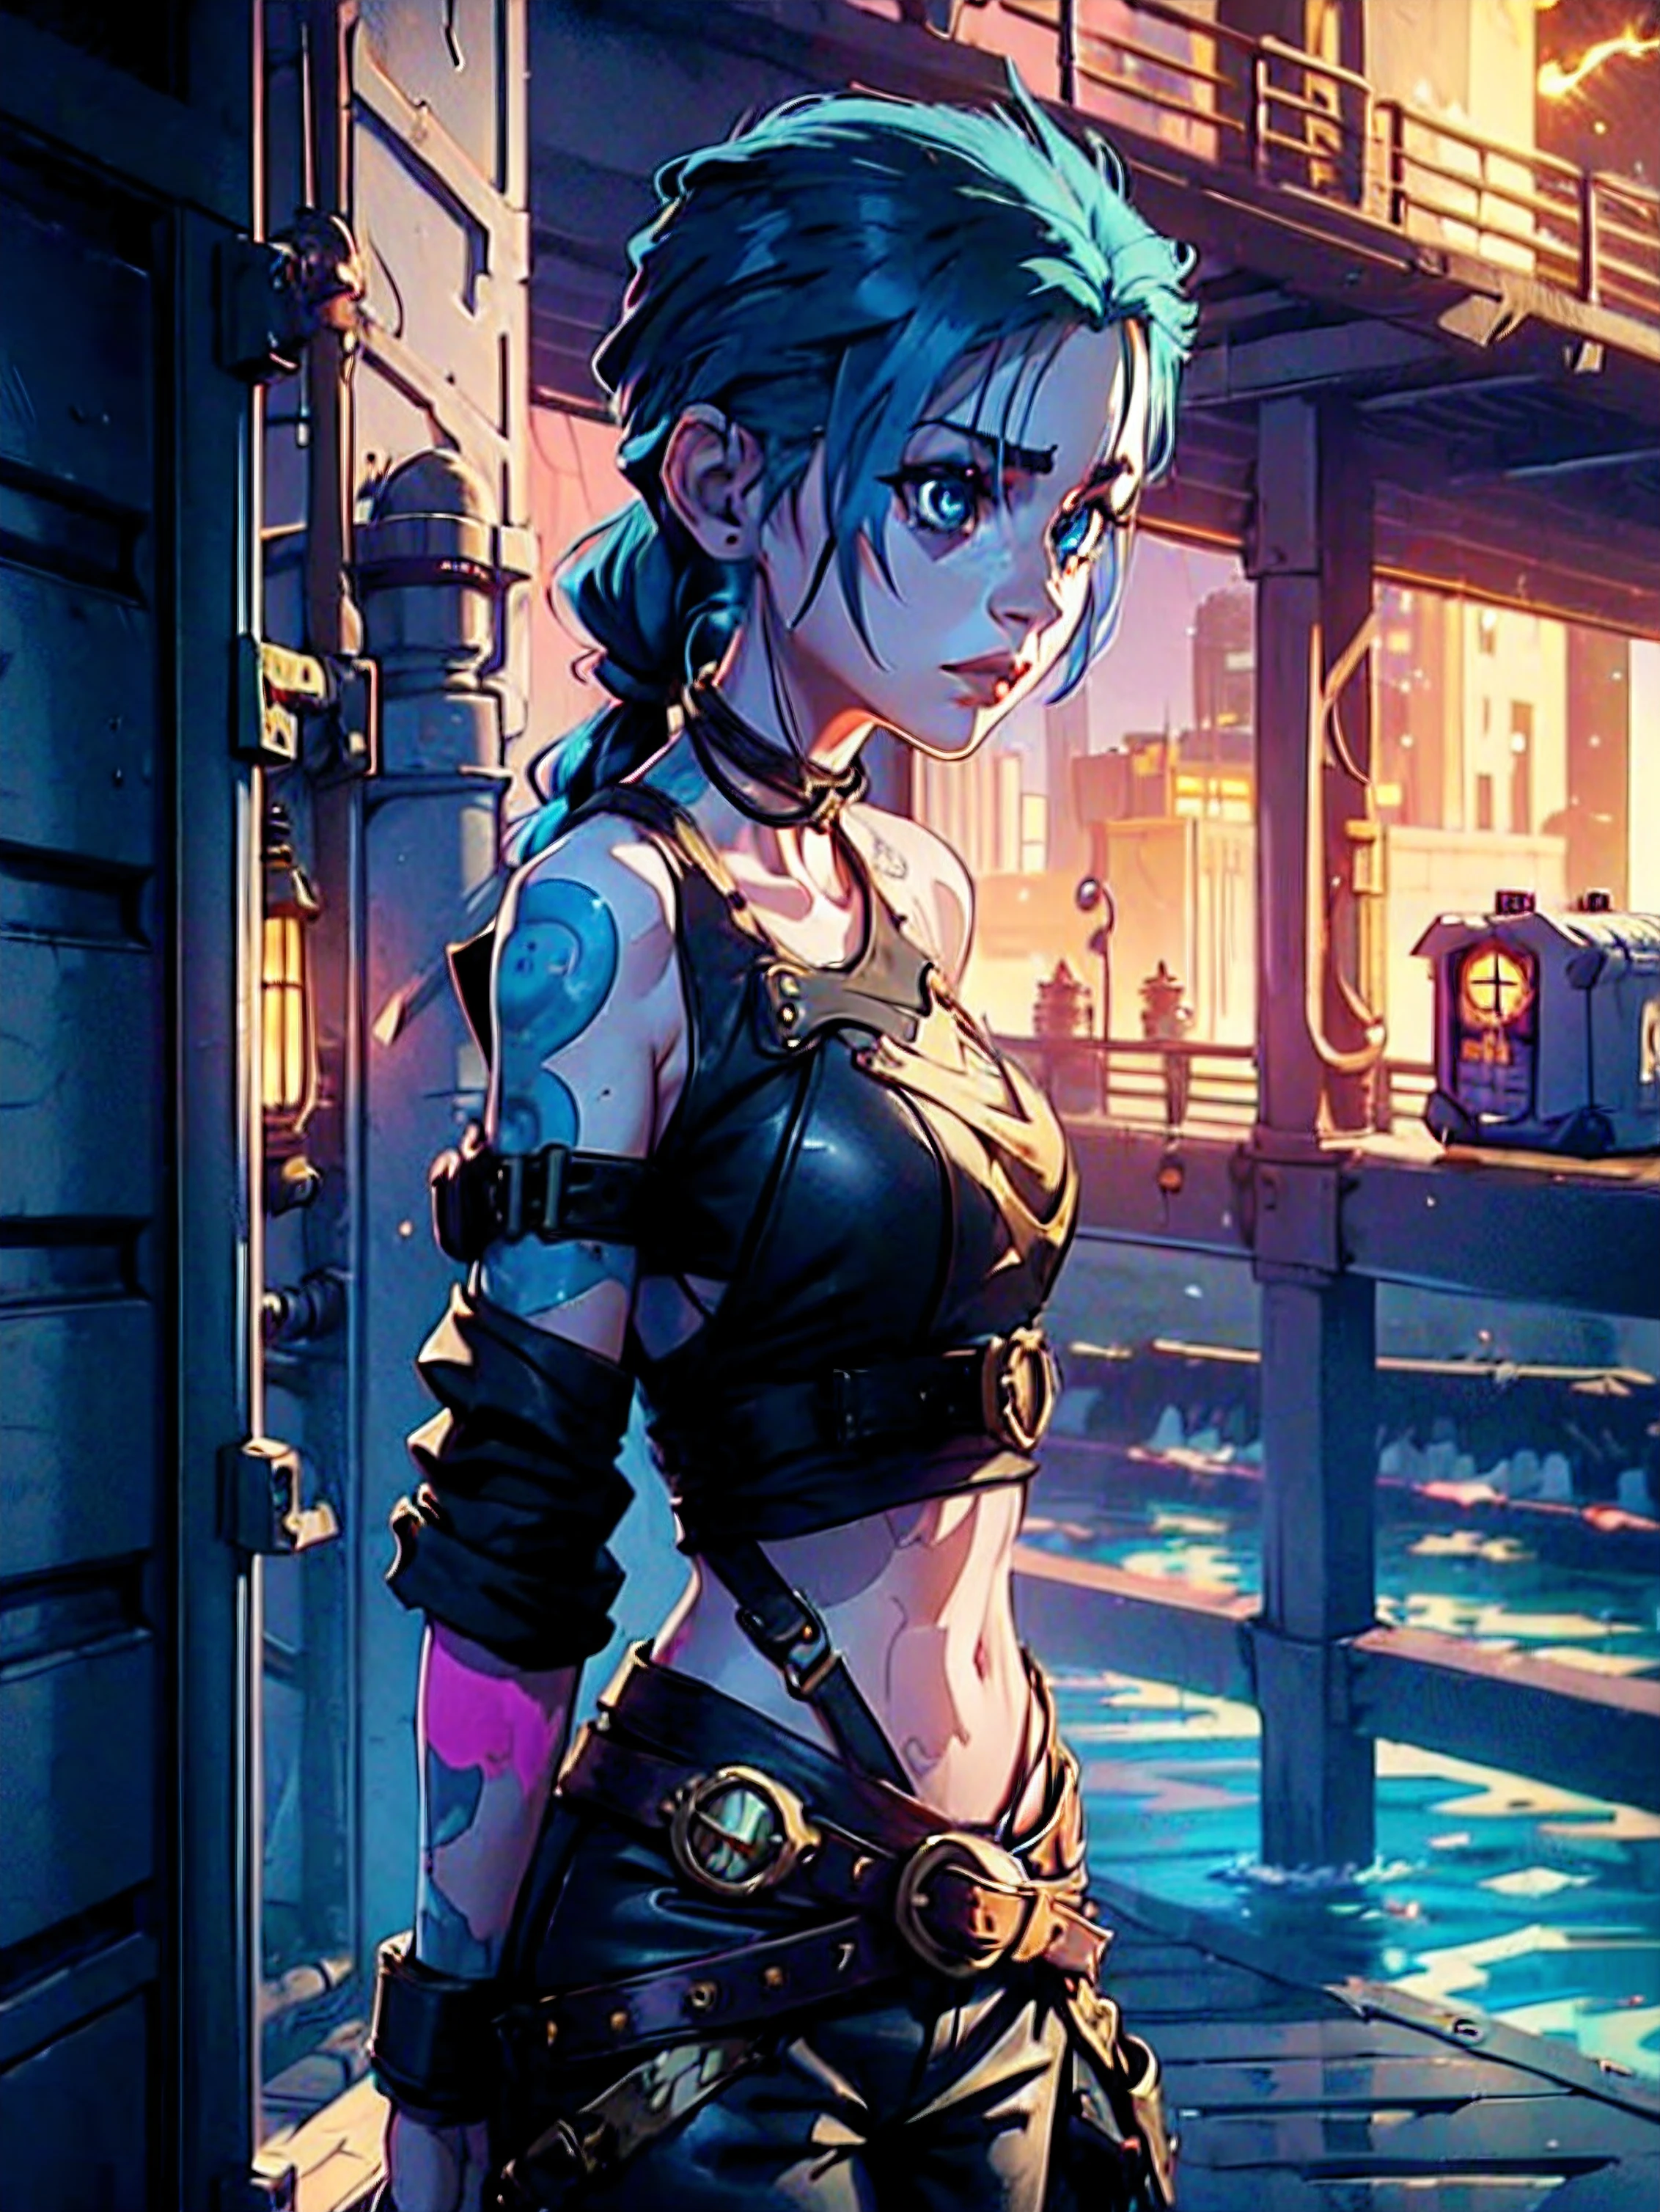 Jinx, League of legends , Arcane. She is on a worn-out pier , near a  wearhouse , industrial steampunk is the theme.There is multiple airships but the dock. Jinx is holding a minigun that is styilised.
Time of day: Fading light of a sunset on the verge of nightfall , mostly Night , sunset is orange and pink however most of it is dark already.
Details: Steampunk, punk , rustic , green orbs with streaks float around her , low angle shot , dark , stylized , celshaded , semi realistic , ultra graphics , ray tracing , unreal engine 5 volumetric lighting.
Poses: Mild pout, she is amused  , walking away with her head turned back , her hands are behind her back, elegant.
Character: Jinx , electric Blue hair , Slender , Pigtails , crop top that reveals her midriff ,skull buckle belt , loose pants , belts and holsters , light blue eyes ,her tattoos, visible on her arms and peeking out from under her arm wraps, fusion of tribal and abstract designs for her tattoos.
(slight pout:1.2),((Mostly Night:1.7)),(Head turning around:1.3), ((Pier: 1.6)) , ((Industrial:1.6)), ((Mini-Gun :1.2)),((Wearhouse : 1.7))